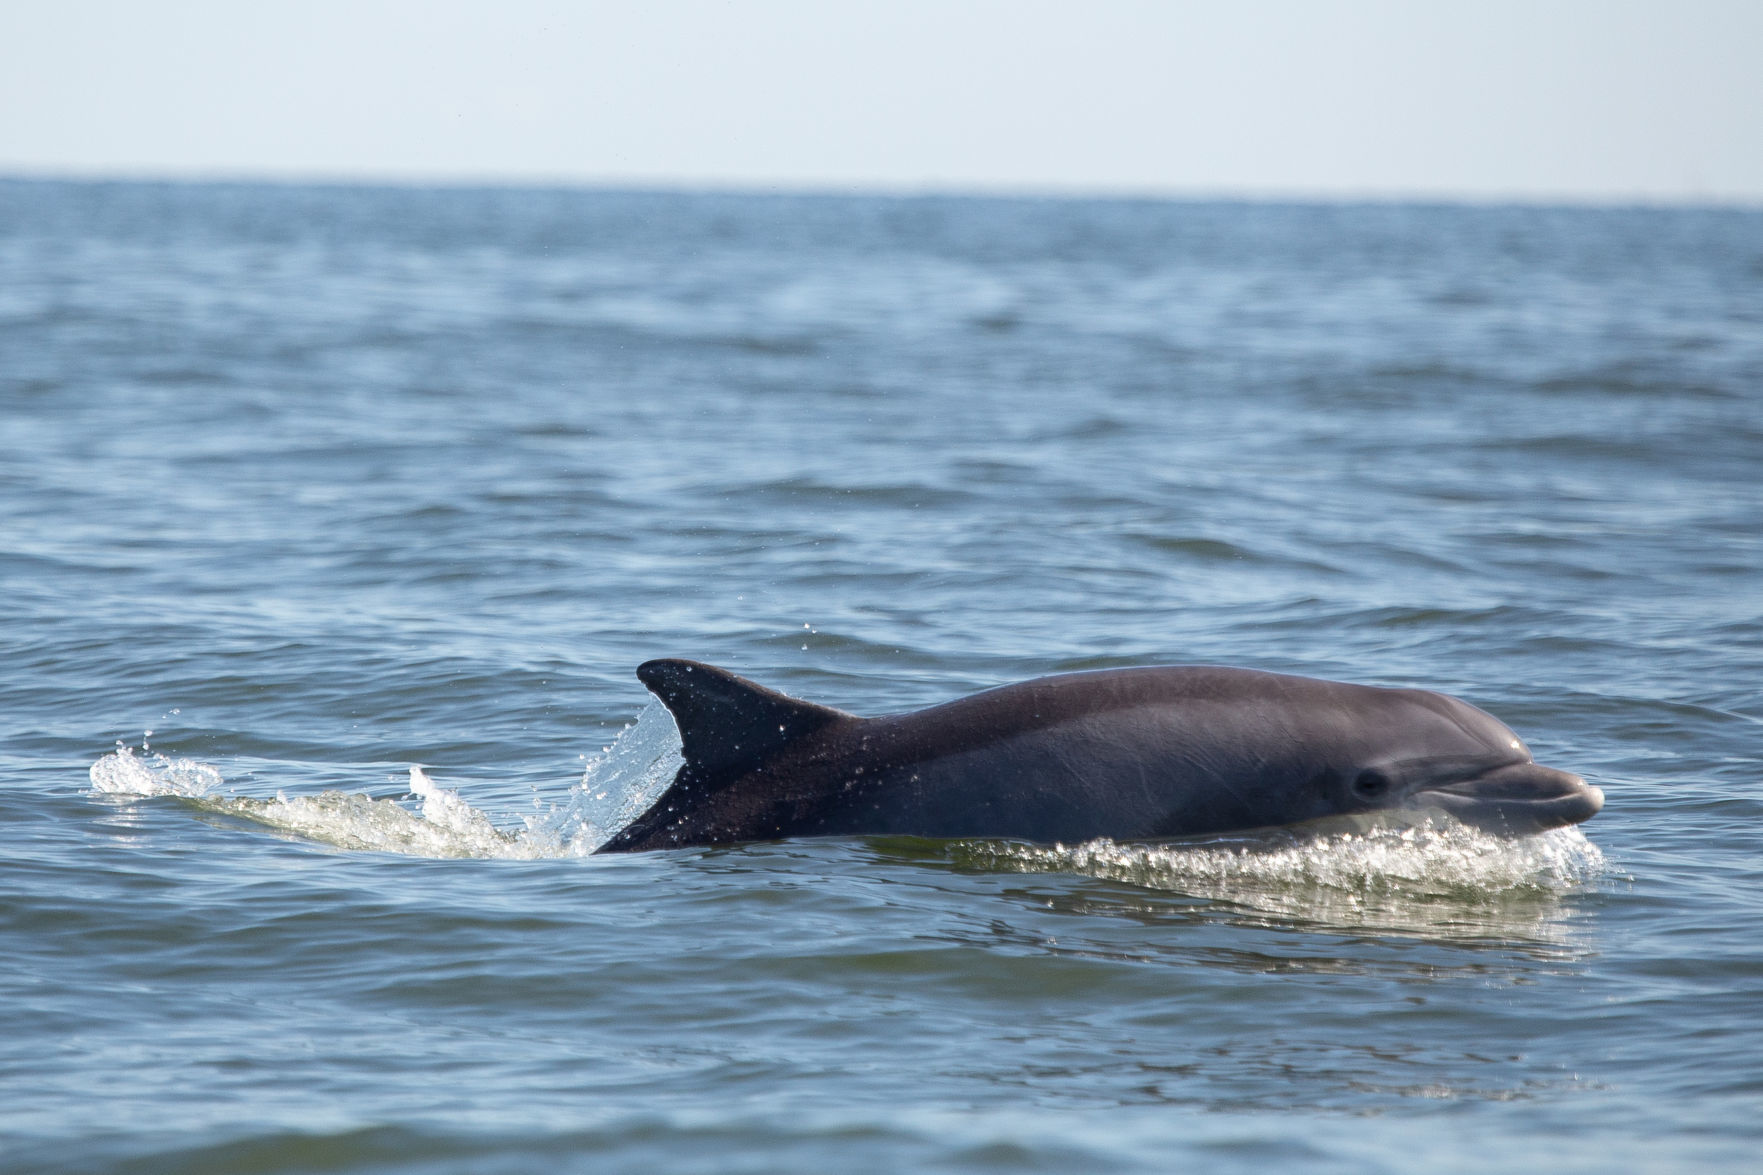 Dolphins are swimming, mating and even giving birth in the Potomac River picture